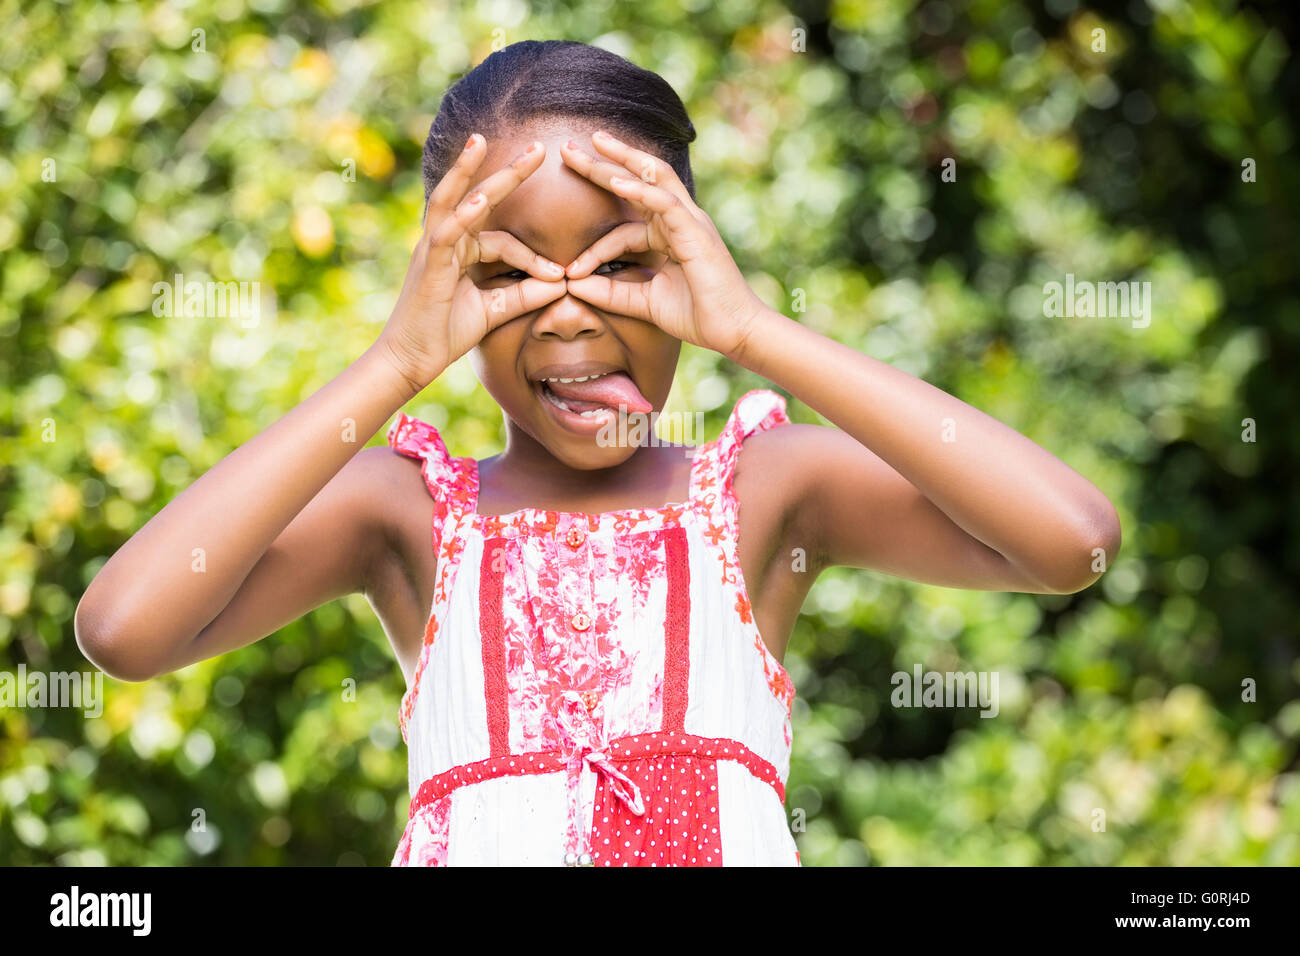 A little girl making faces Stock Photo